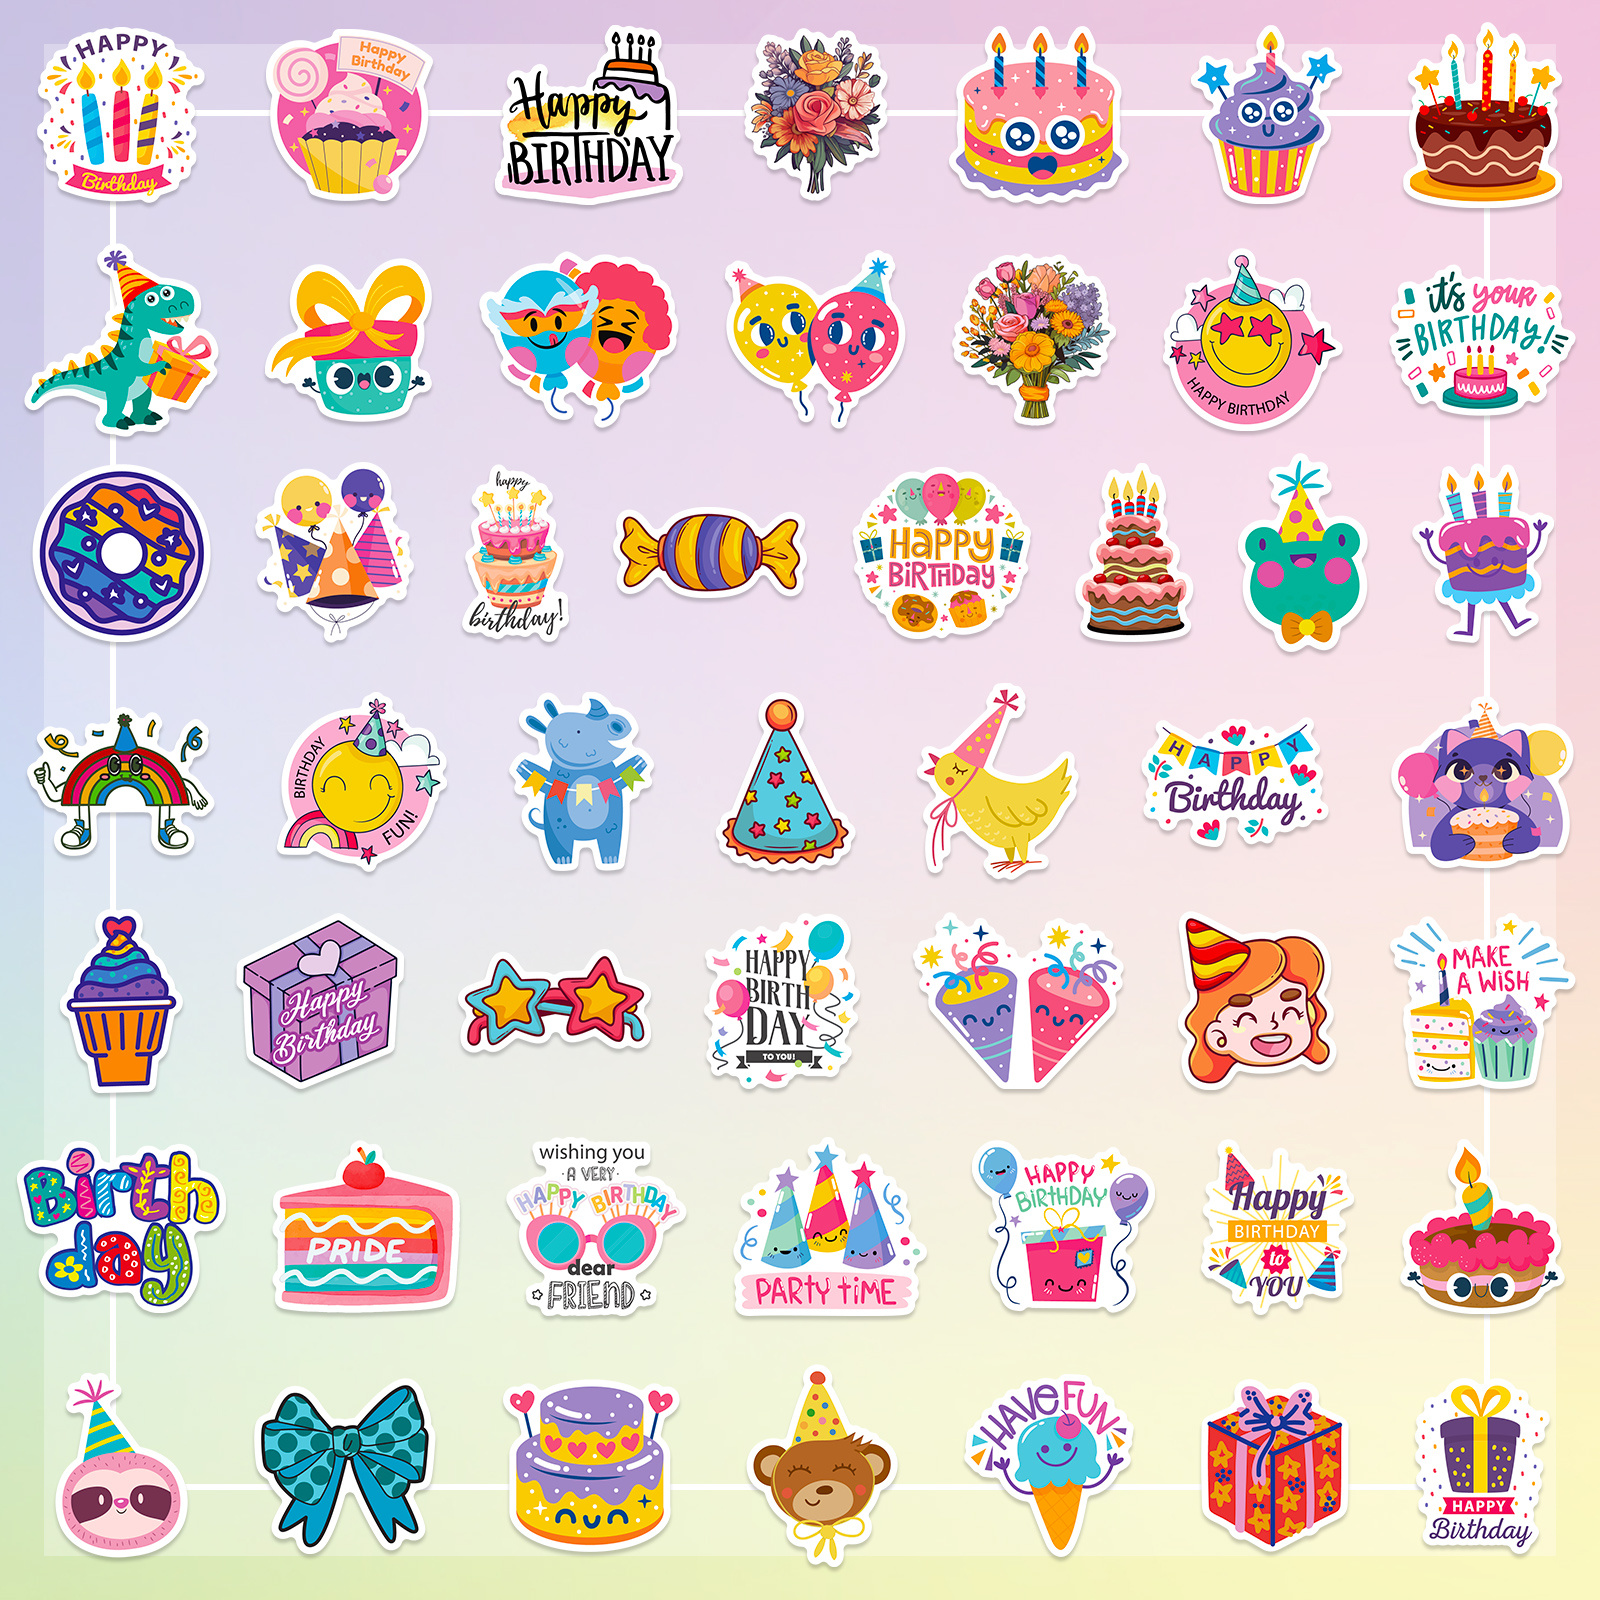 dufibo 100pcs happy birthday stickers birthday party stickers candy cake  stickers, cute packaging,colorful waterproof stickers,vinyl